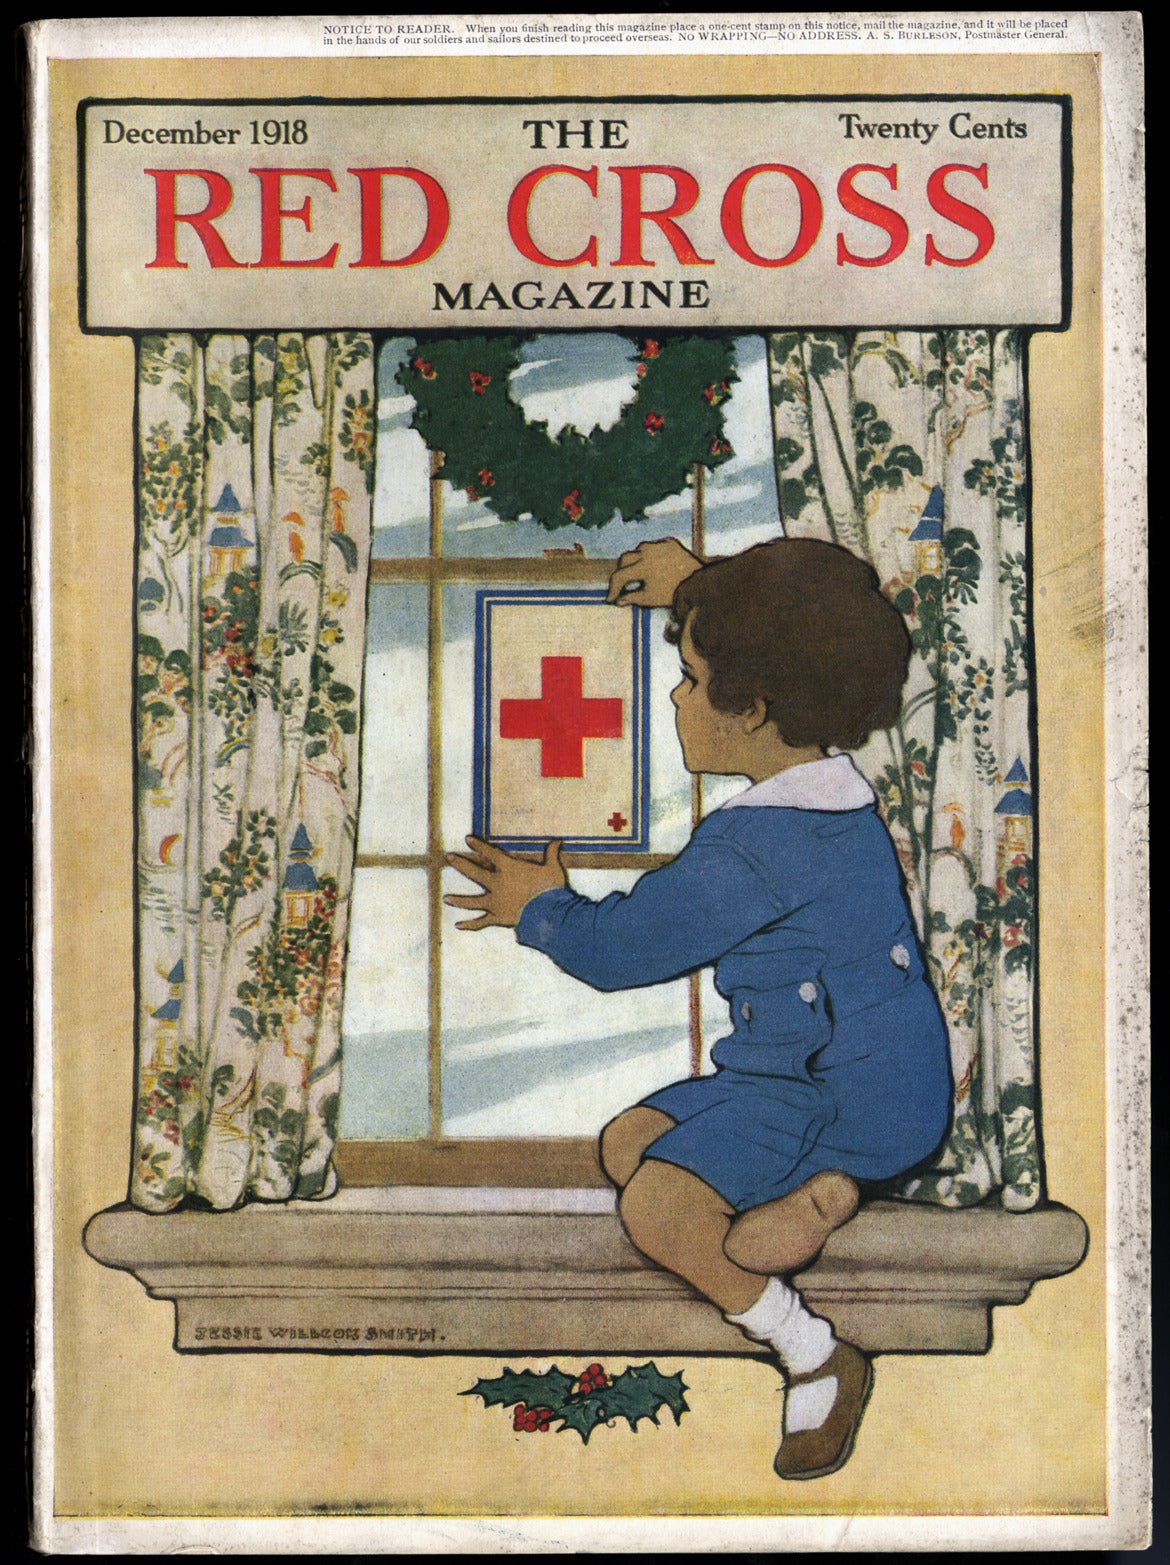 A large and poignant oil painting by the Spanish-born American artist and illustrator Francis Luis Mora. This moving and expressive artwork was created as the frontispiece for the December 1918 issue of Red Cross Magazine. As published this appeared